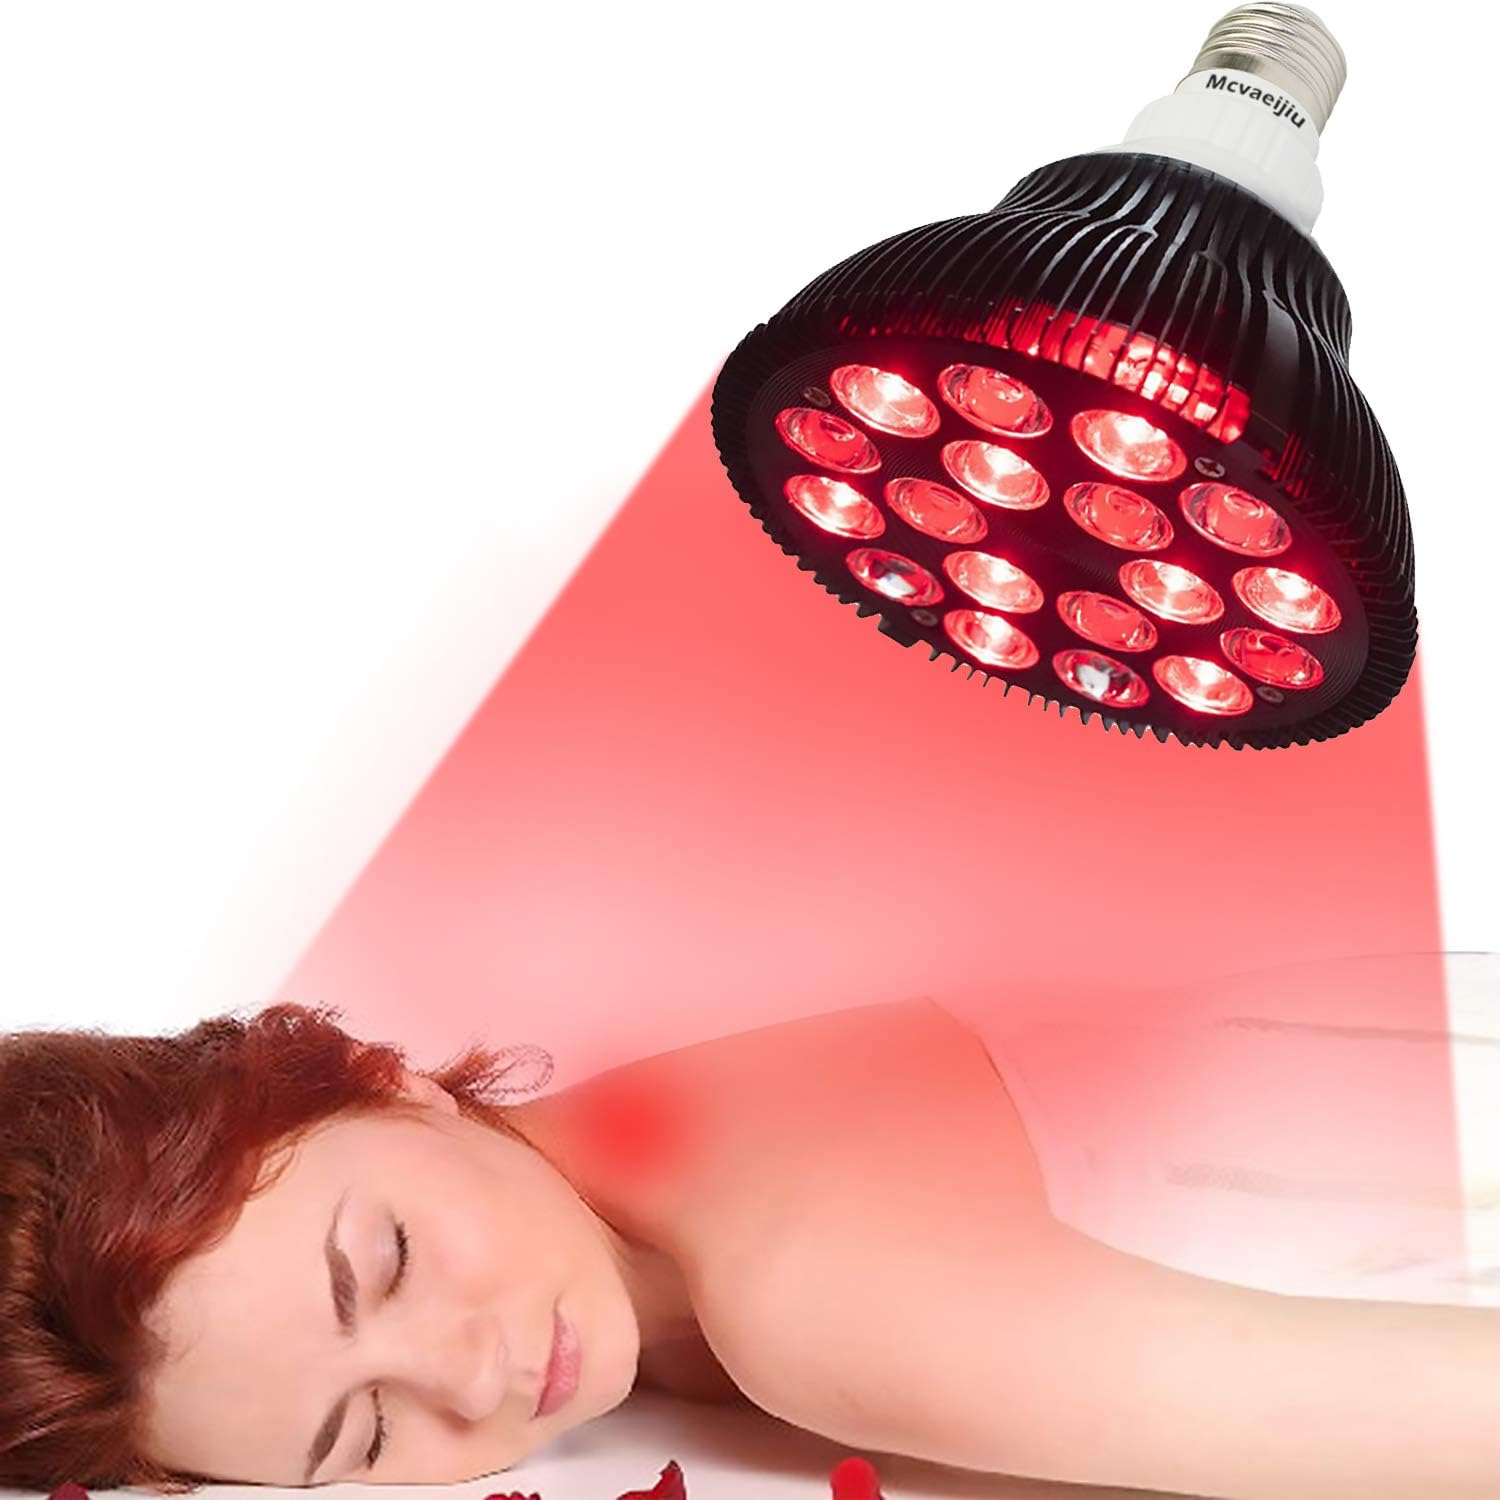 What Are the Benefits of Using Near Infrared Light Treatment?